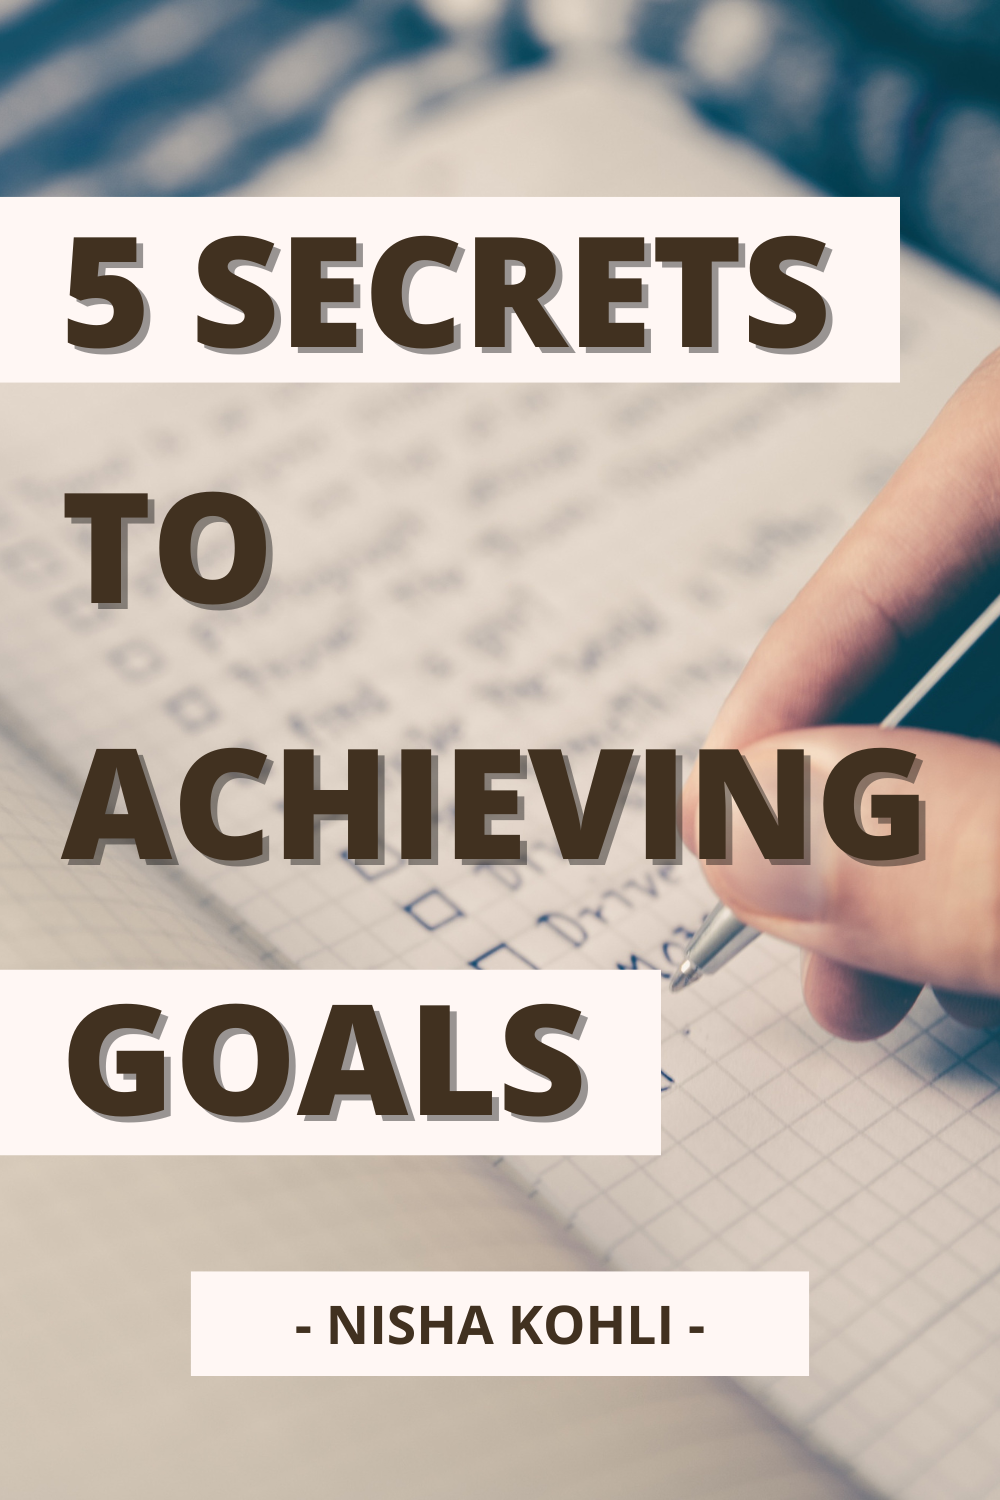 This pin is about 5 secrets to achieving goals